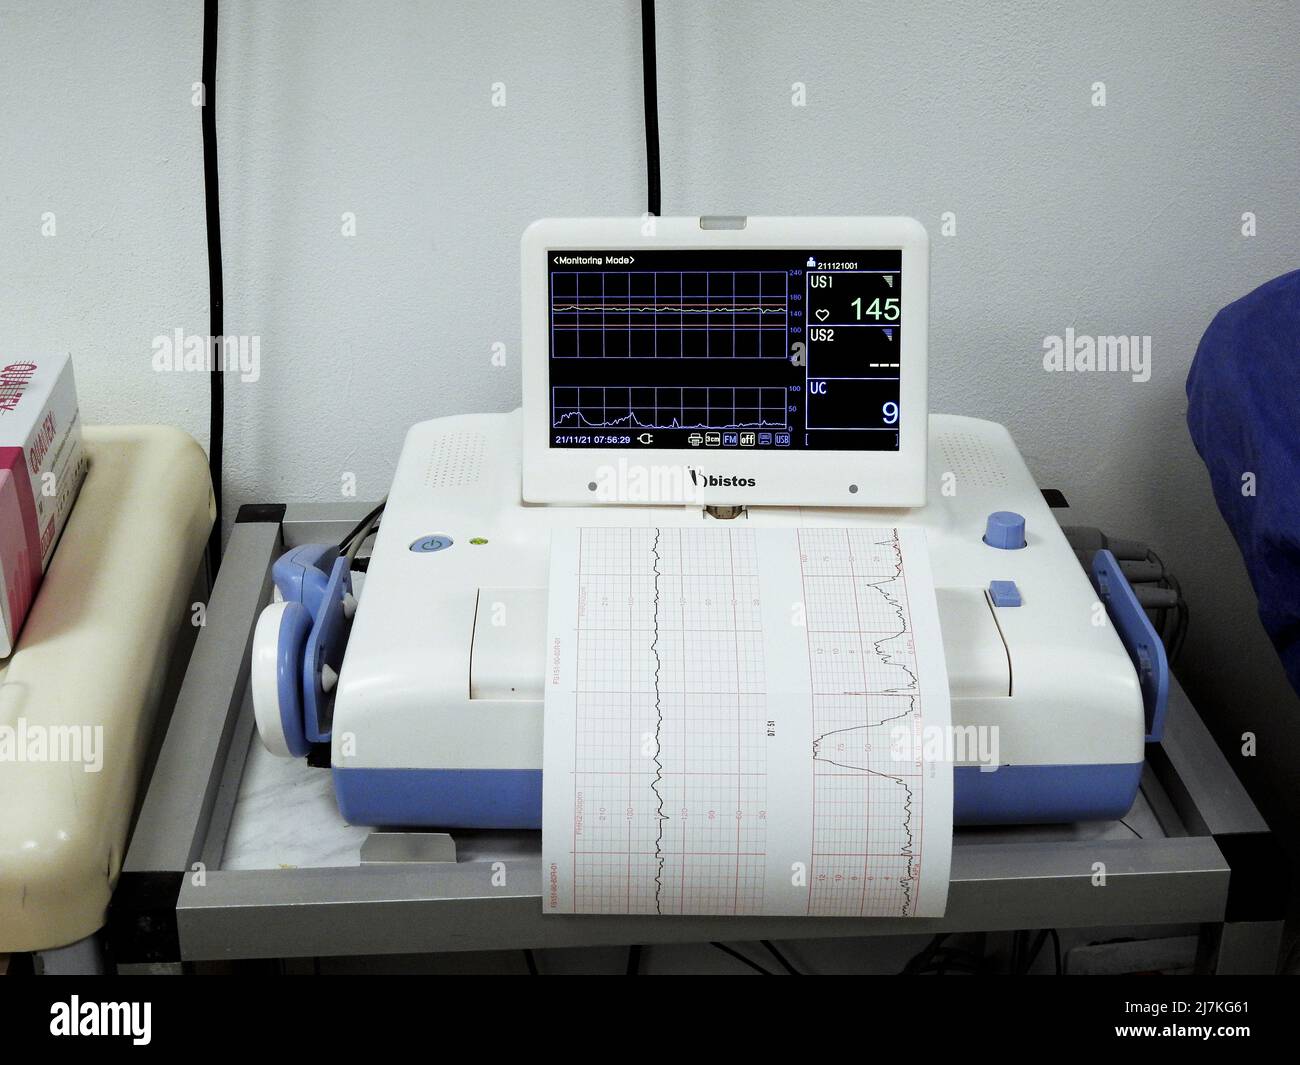 Cairo, Egypt, November 21 2021: Cardiotocography device placed on mother's abdomen recording the fetal heart rate obtained via ultrasound transducer, Stock Photo